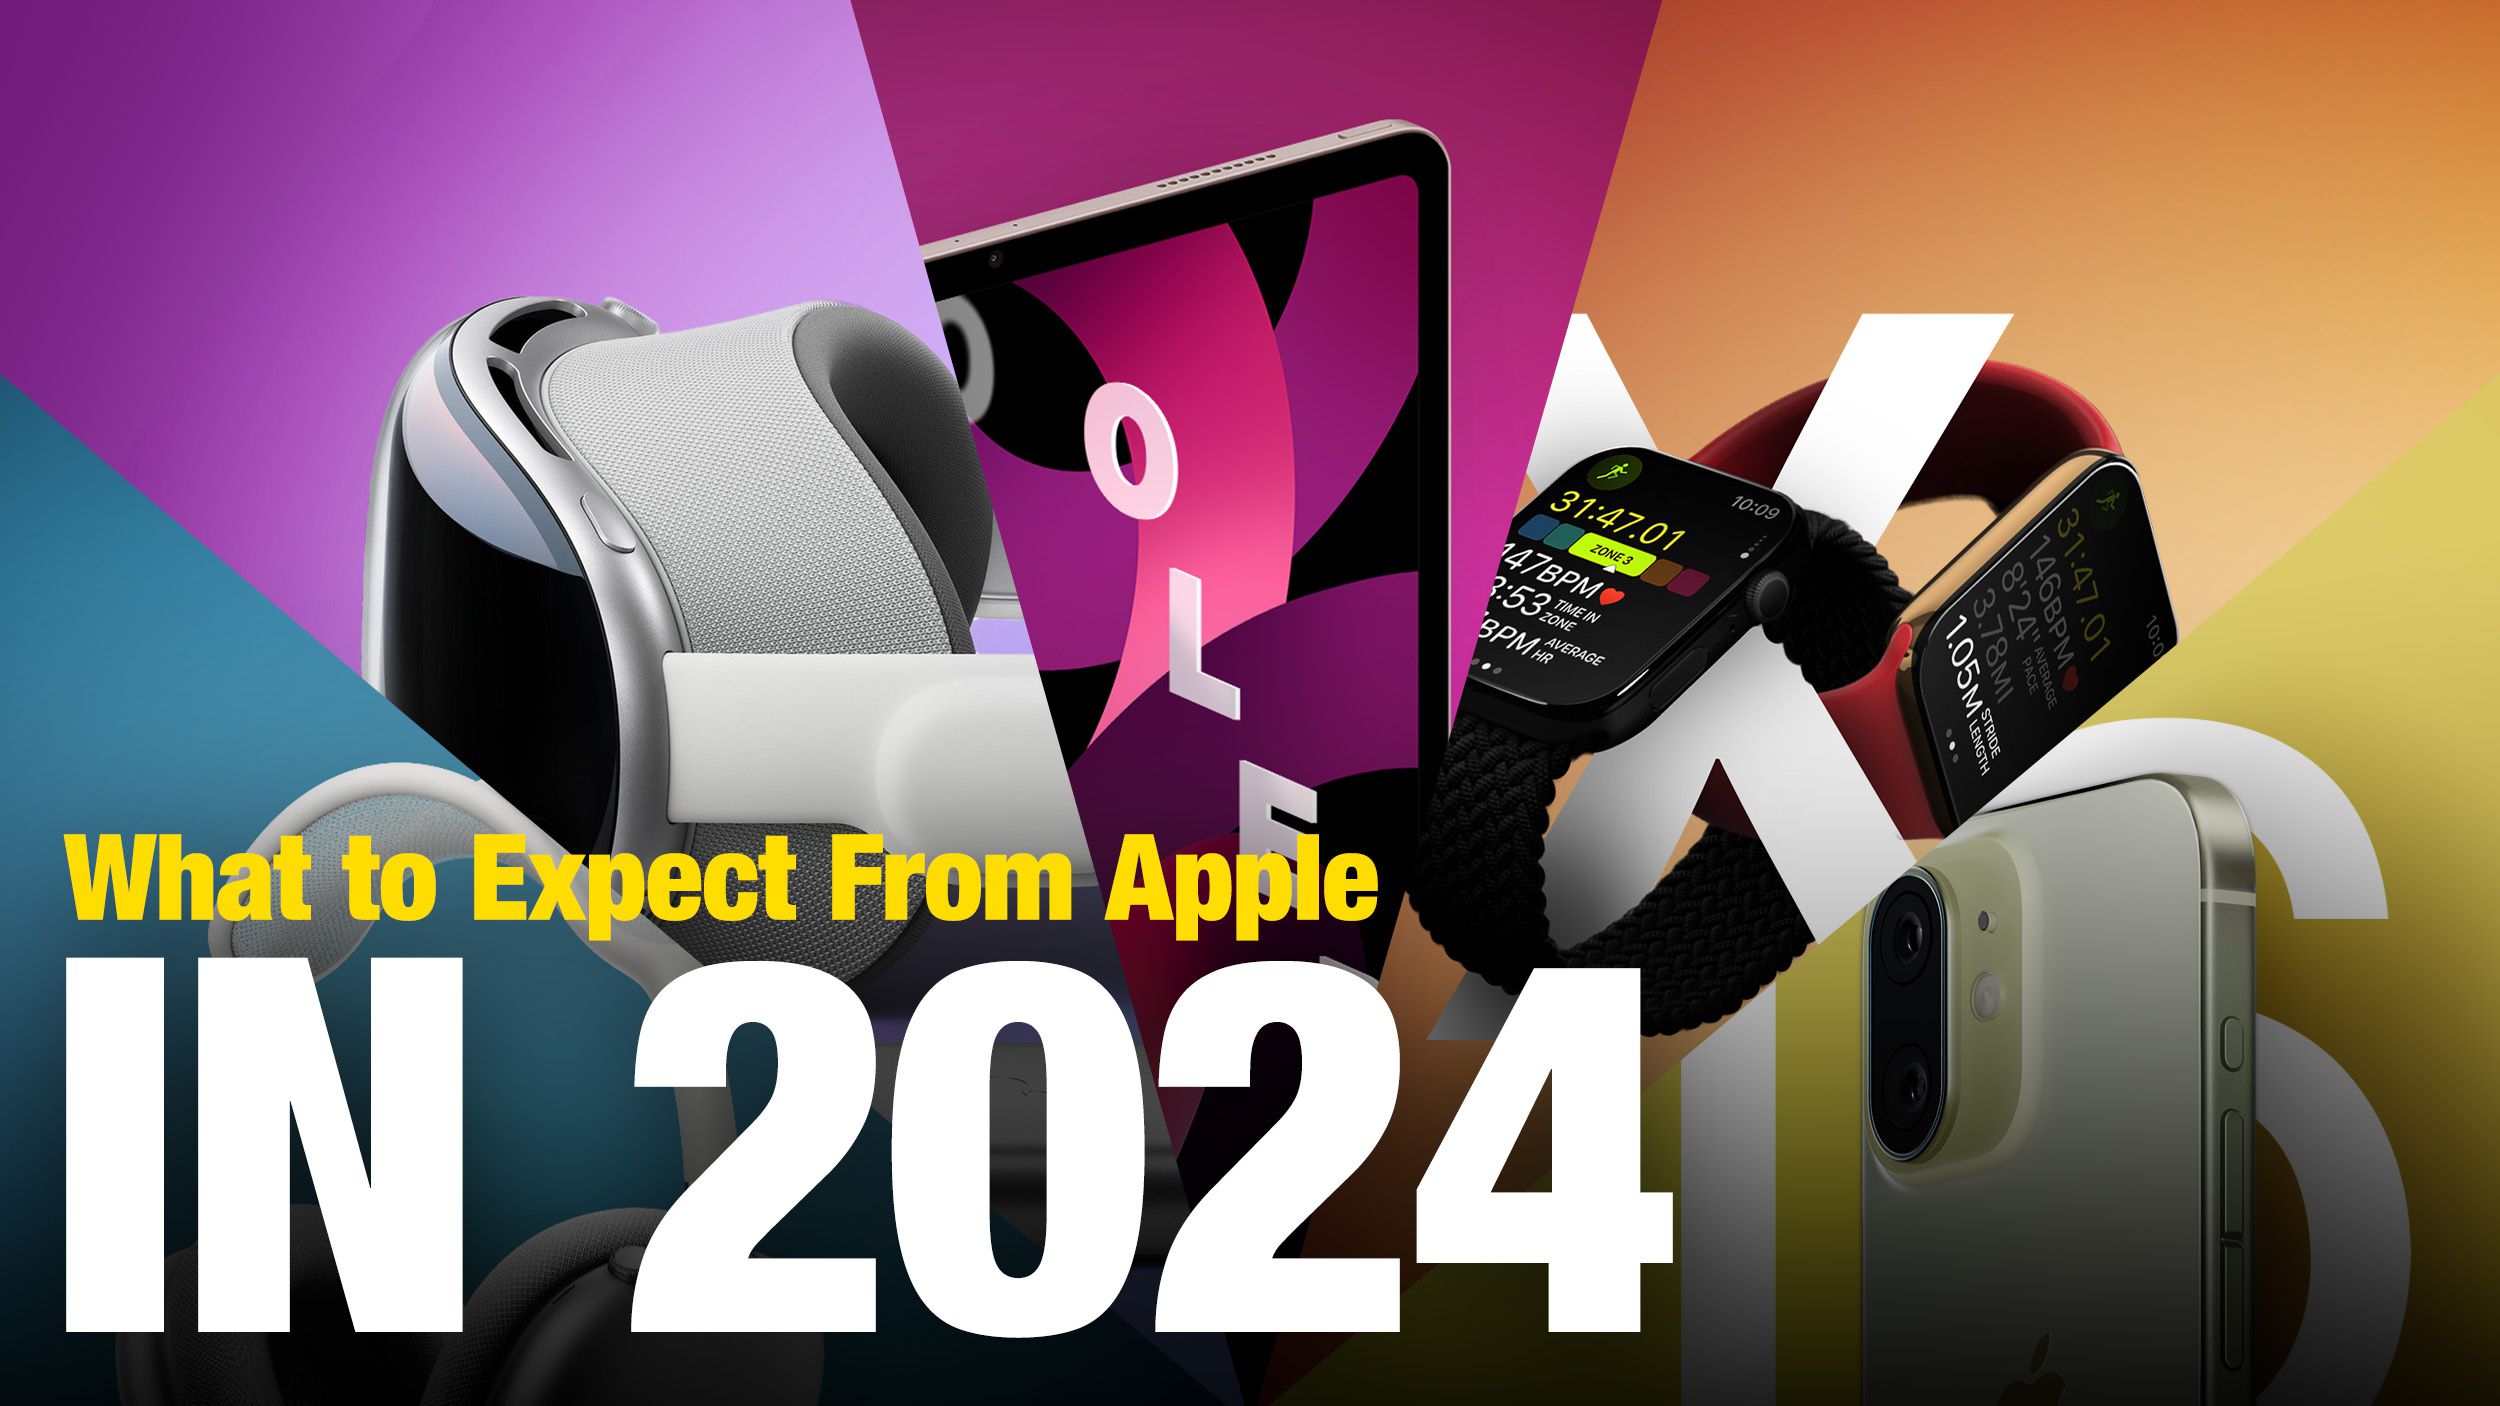 Image for article What to Expect From Apple in 2024 Vision Pro, iPhone 16 Models, Revamped iPad Pro and More  MacRumors